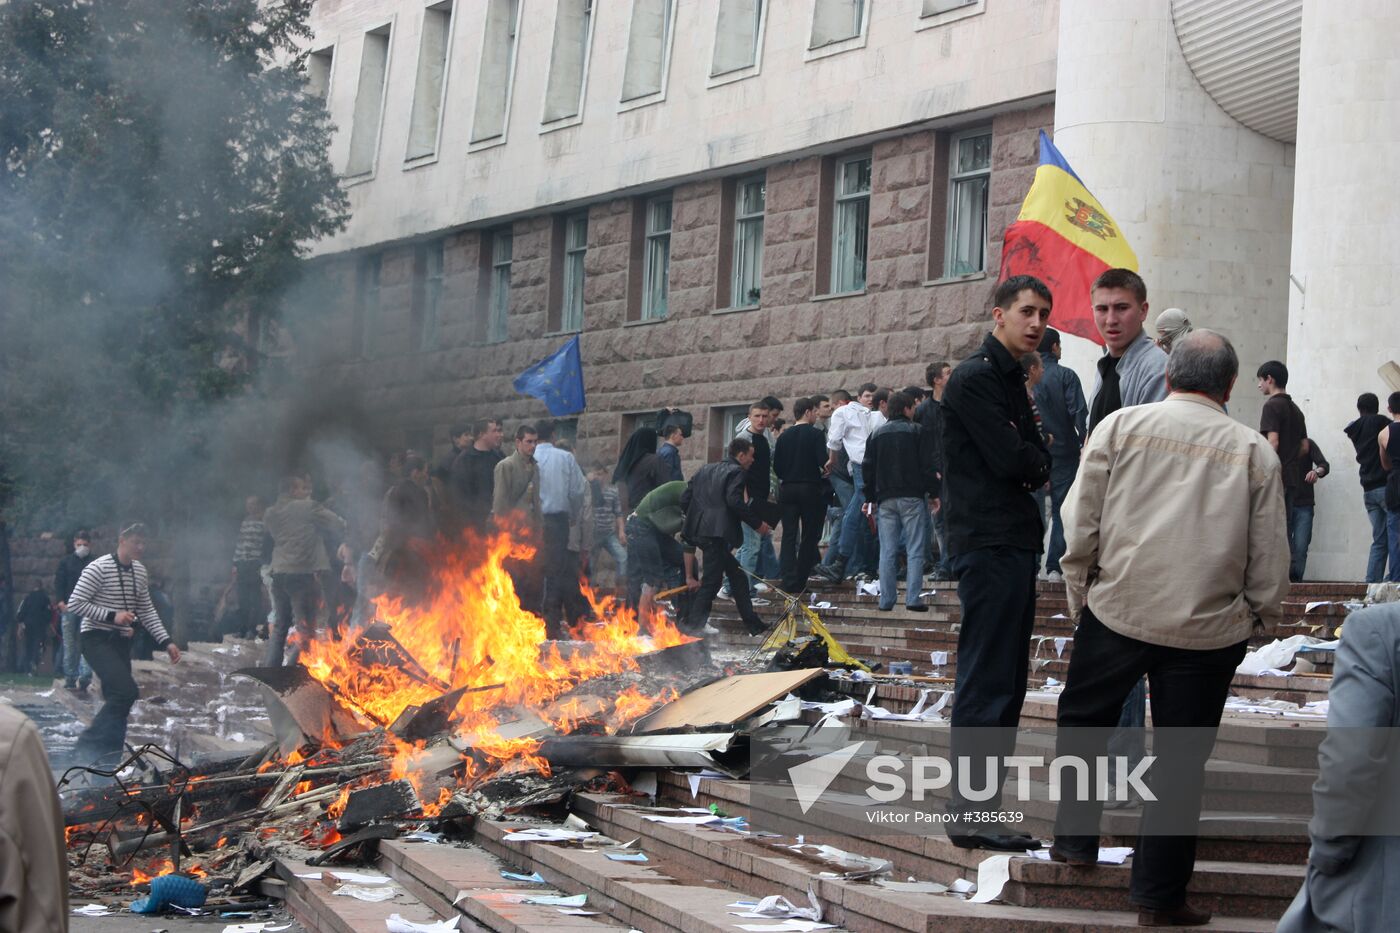 Act of protest by Moldavian opposition